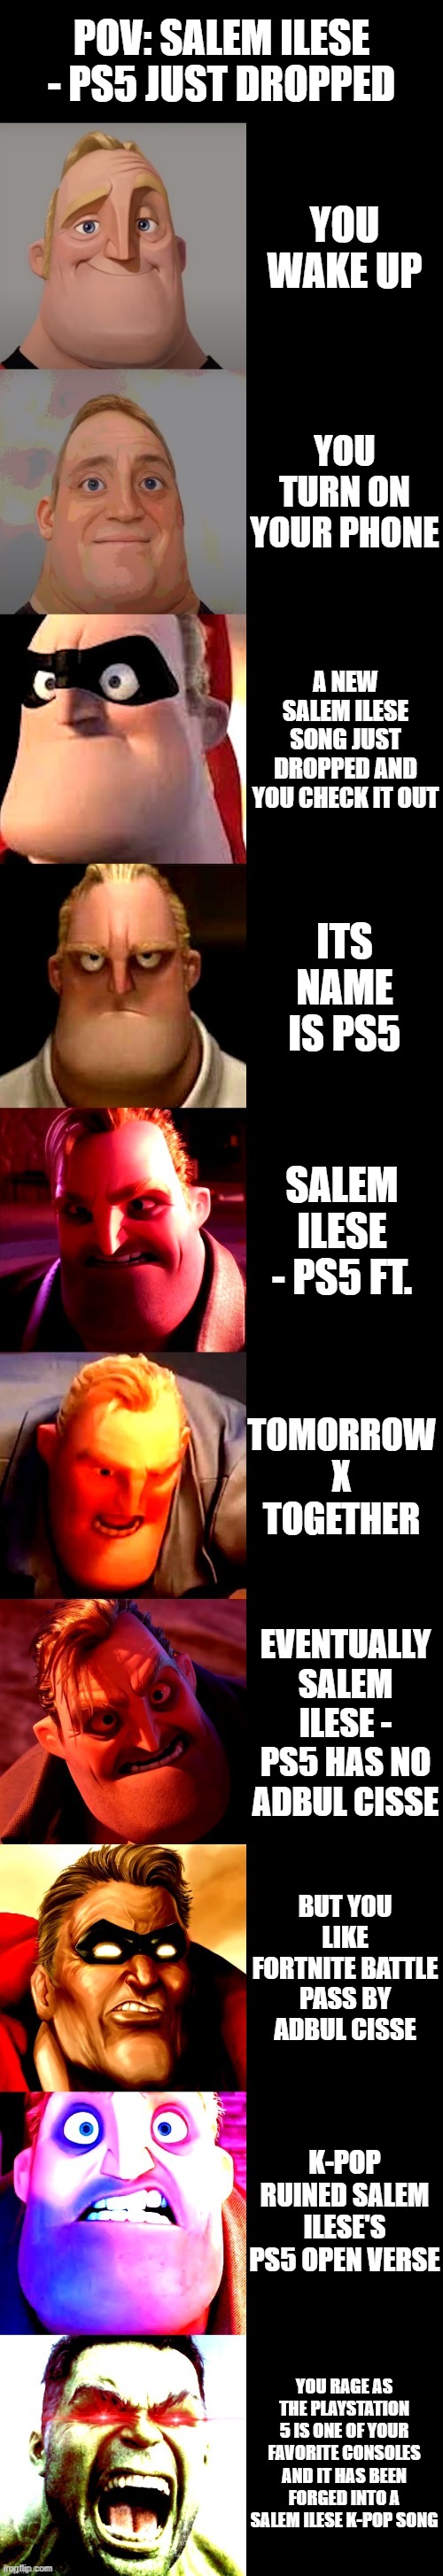 Kpoop sucks |  POV: SALEM ILESE - PS5 JUST DROPPED; YOU WAKE UP; YOU TURN ON YOUR PHONE; A NEW SALEM ILESE SONG JUST DROPPED AND YOU CHECK IT OUT; ITS NAME IS PS5; SALEM ILESE - PS5 FT. TOMORROW X TOGETHER; EVENTUALLY SALEM ILESE - PS5 HAS NO ADBUL CISSE; BUT YOU LIKE FORTNITE BATTLE PASS BY ADBUL CISSE; K-POP RUINED SALEM ILESE'S PS5 OPEN VERSE; YOU RAGE AS THE PLAYSTATION 5 IS ONE OF YOUR FAVORITE CONSOLES AND IT HAS BEEN FORGED INTO A SALEM ILESE K-POP SONG | image tagged in mr incredible becoming angry,kpop,meme,ps5 | made w/ Imgflip meme maker